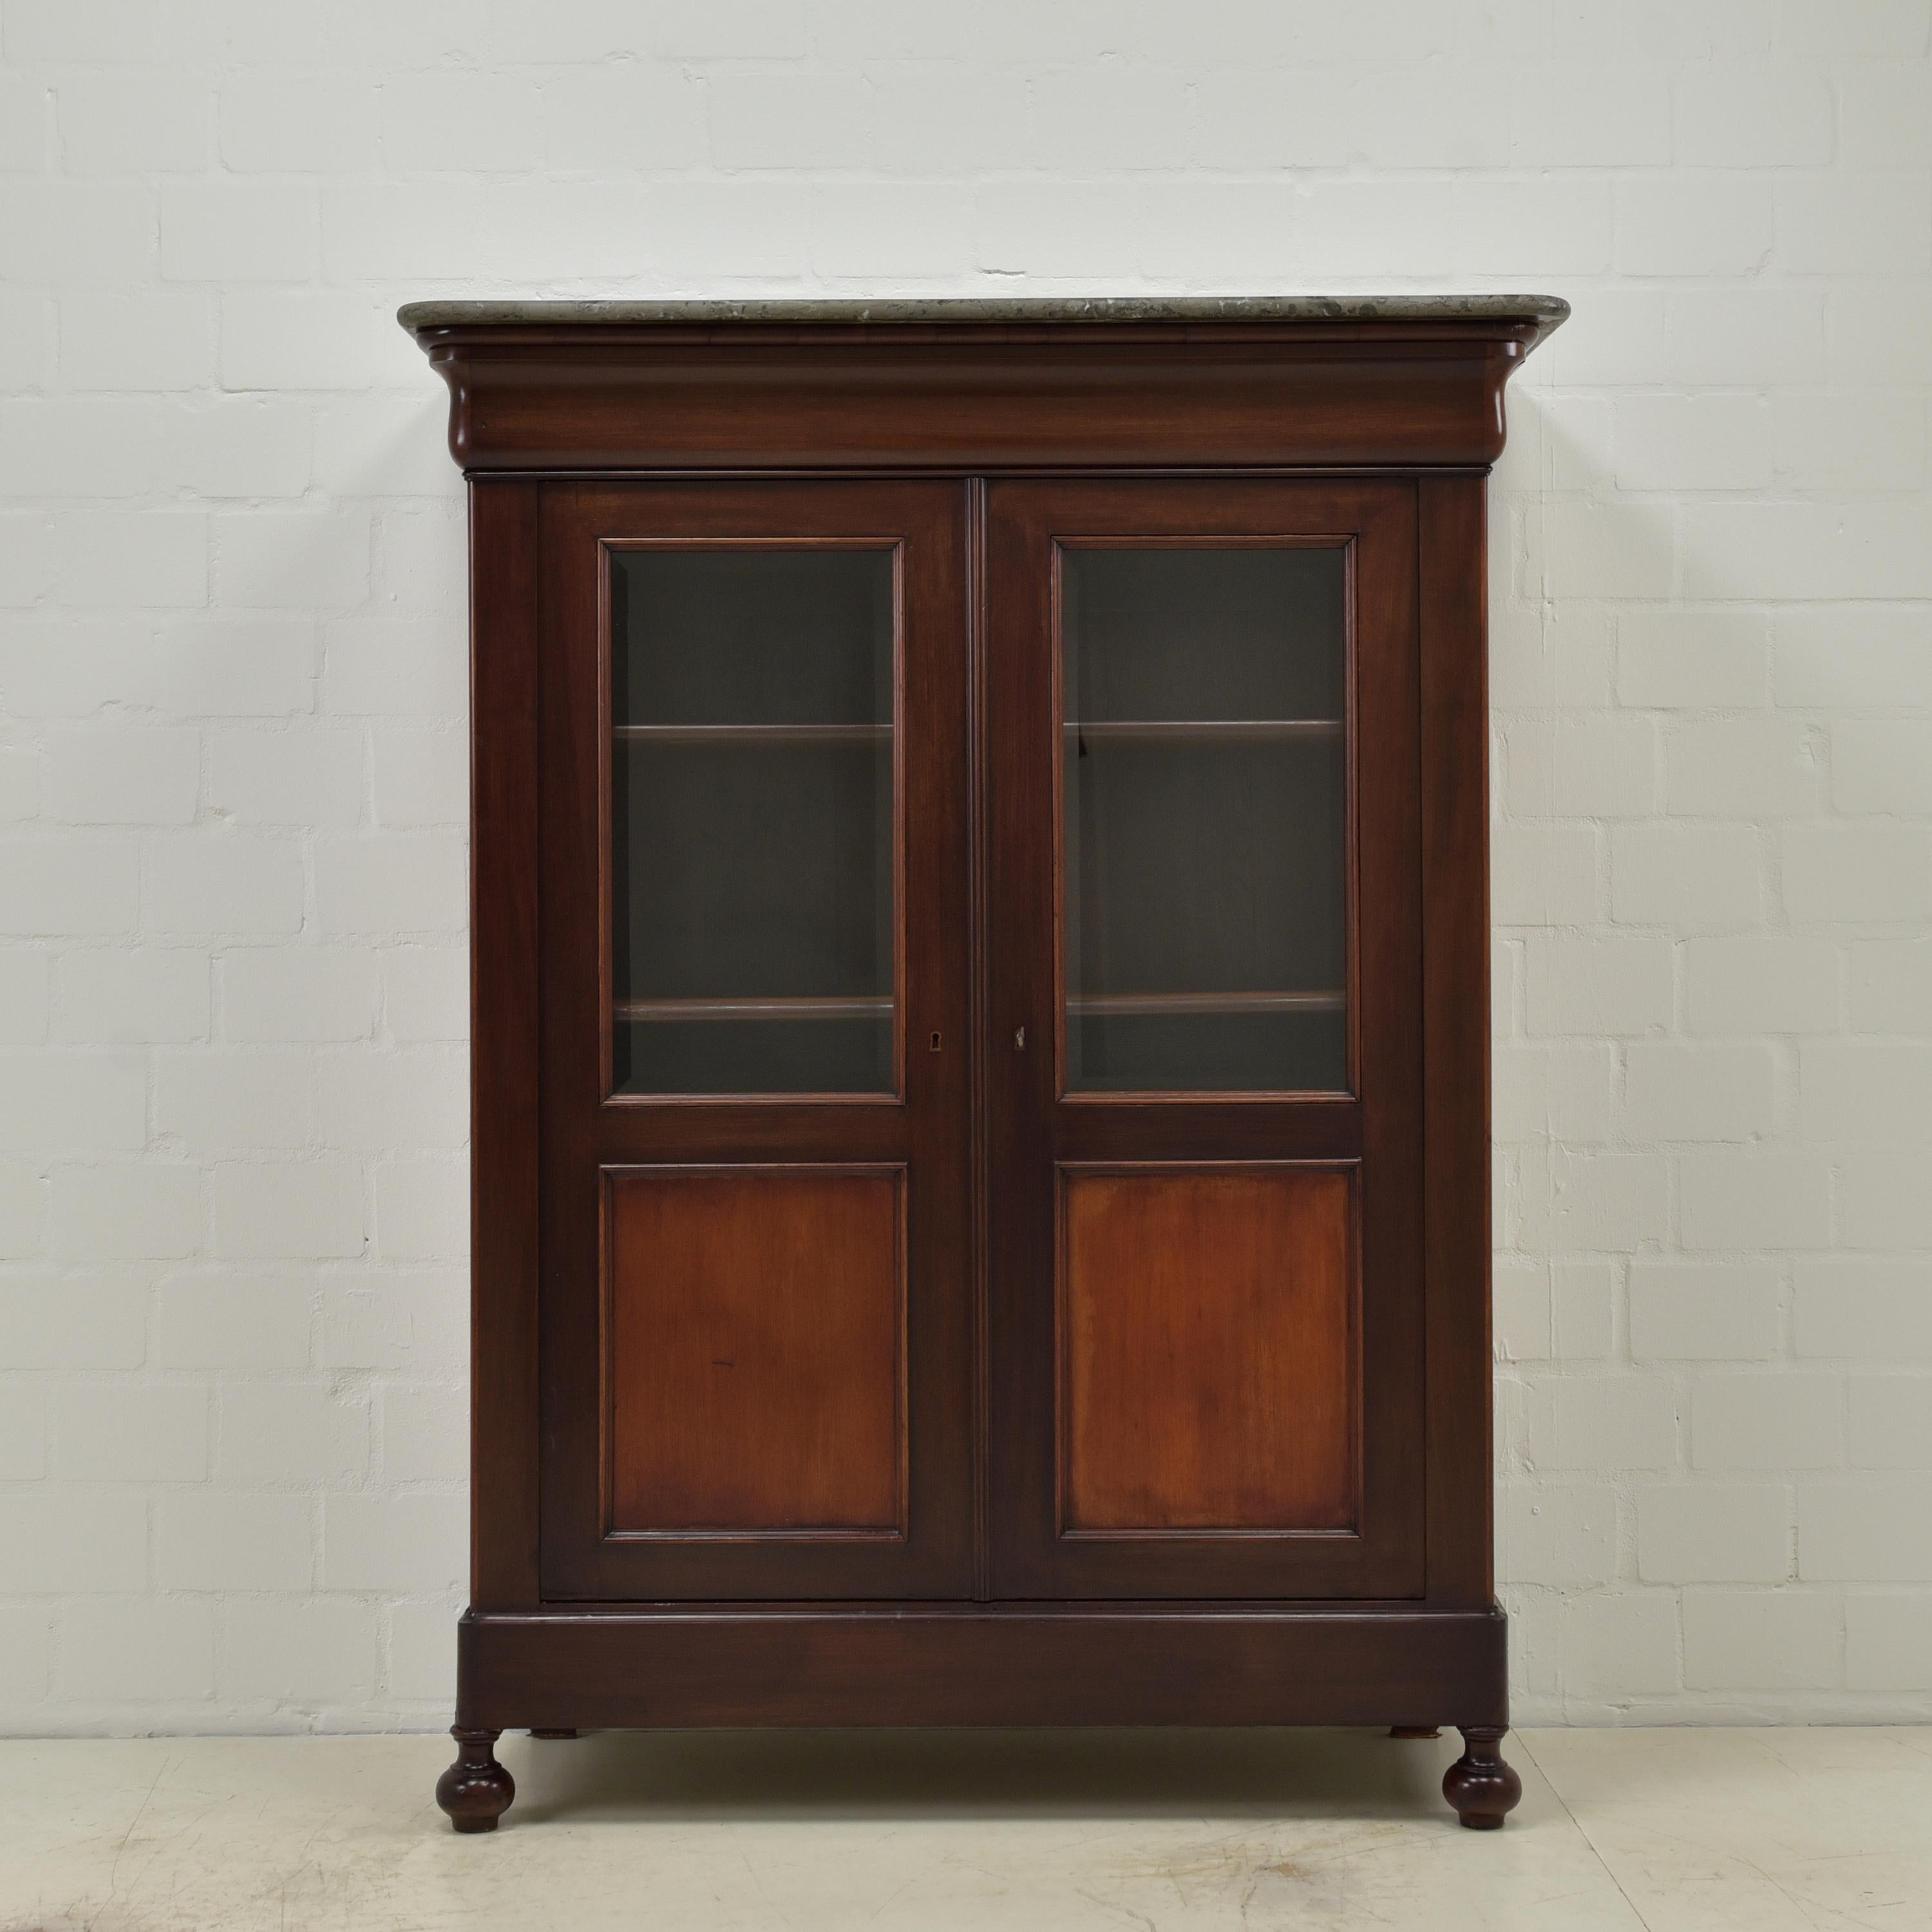 Small display cabinet restored mahogany circa 1900 display case

Features:
Two-door model with 3 shelves
Original glazing with facet cut
Recessed bar lock
Quite factual model
Relatively low
The cabinet cannot be dismantled

Additional